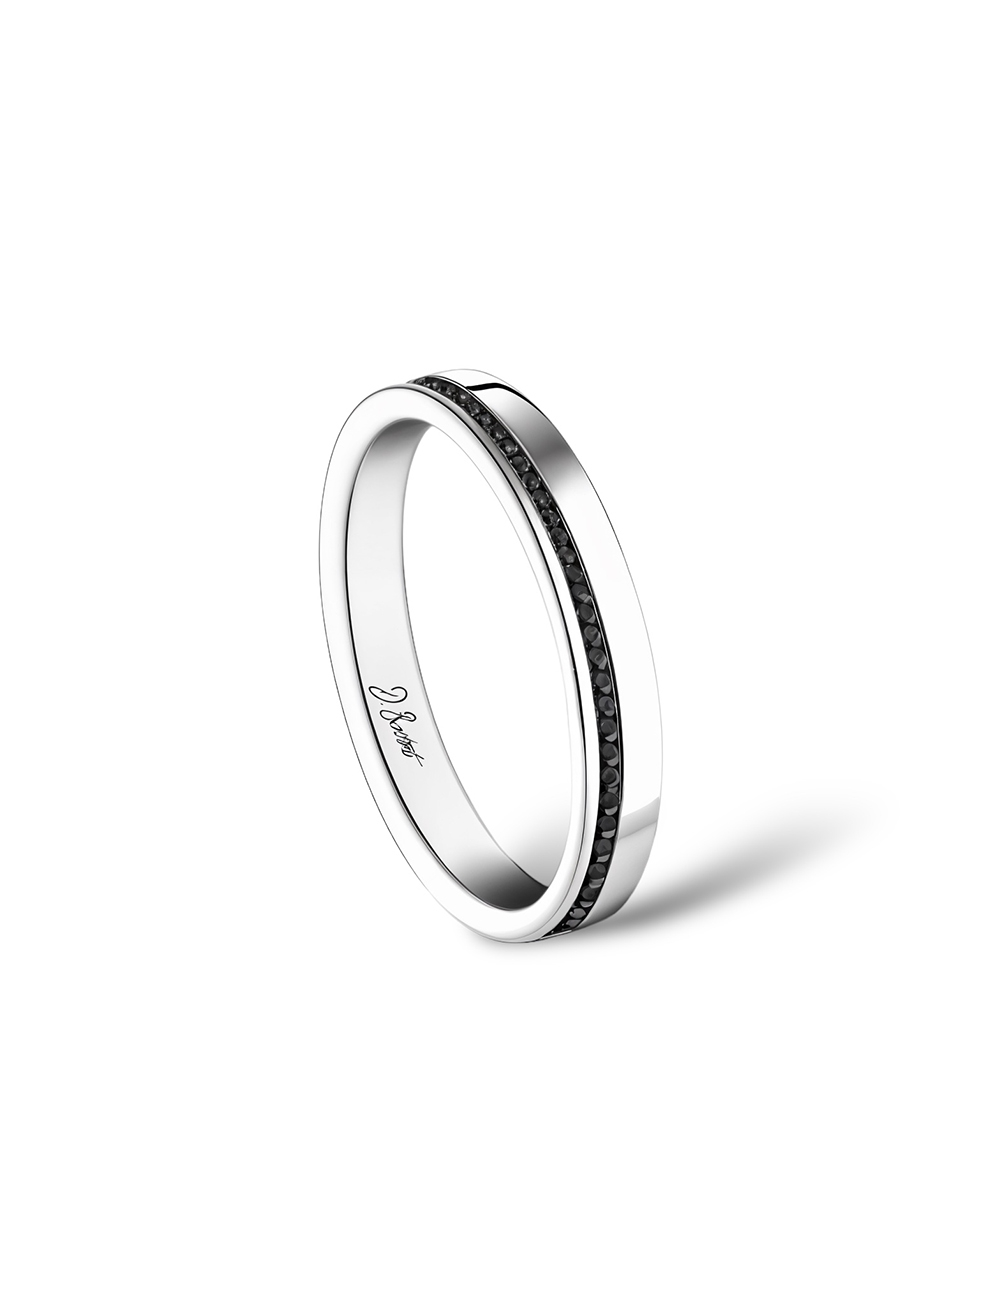 Modern unisex platinum wedding band with black diamonds, symbolizing bold and distinctive love, handcrafted in France.